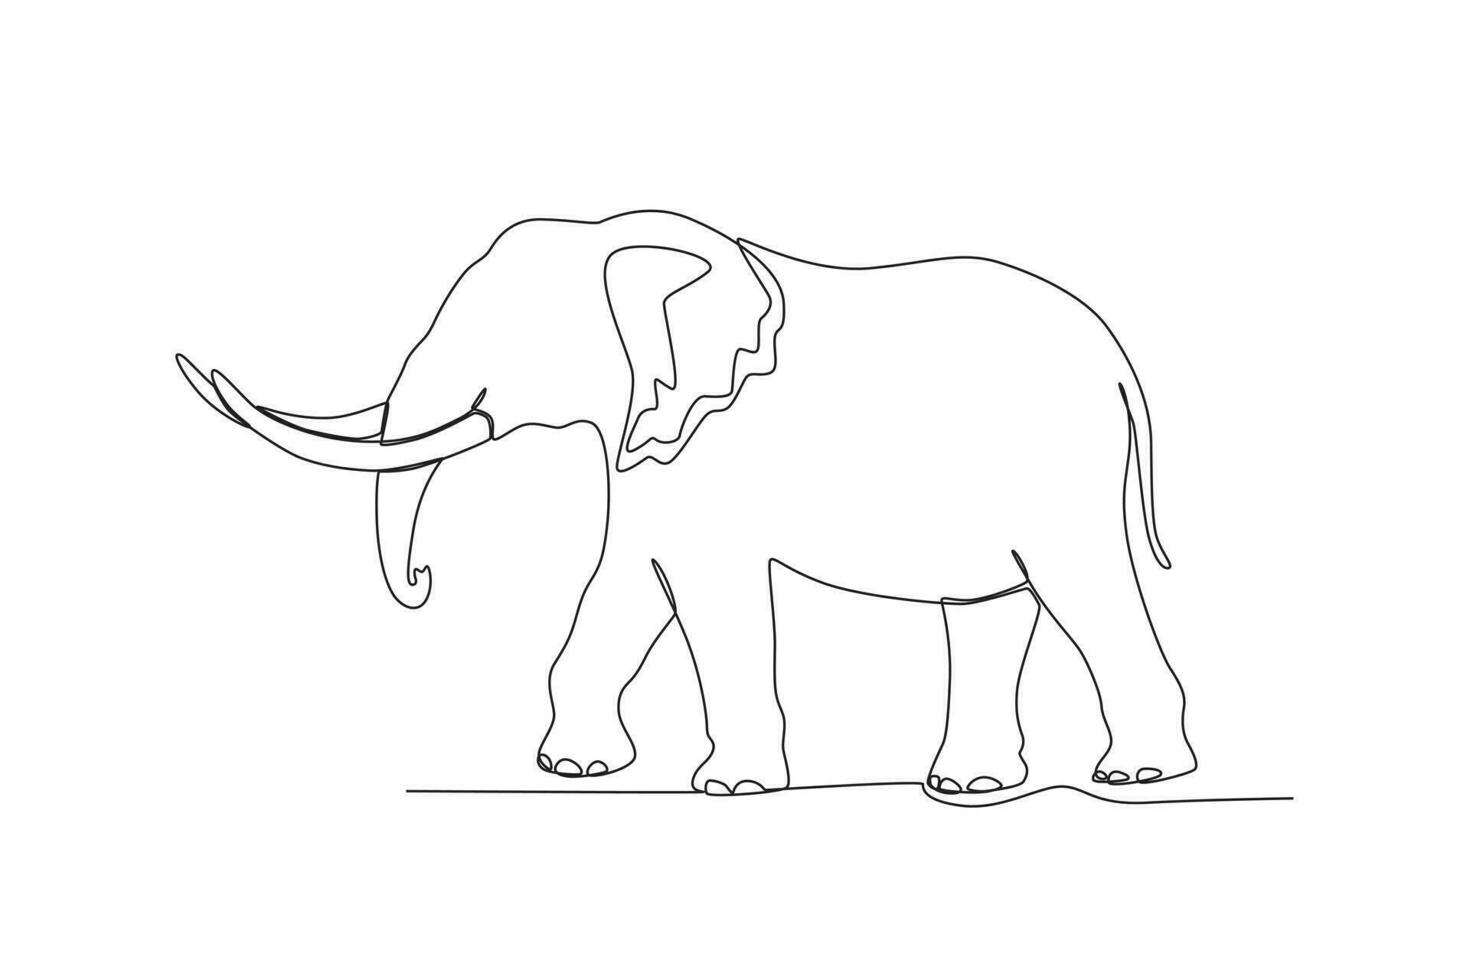 Single one line drawing of a elephant. Continuous line draw design graphic vector illustration.